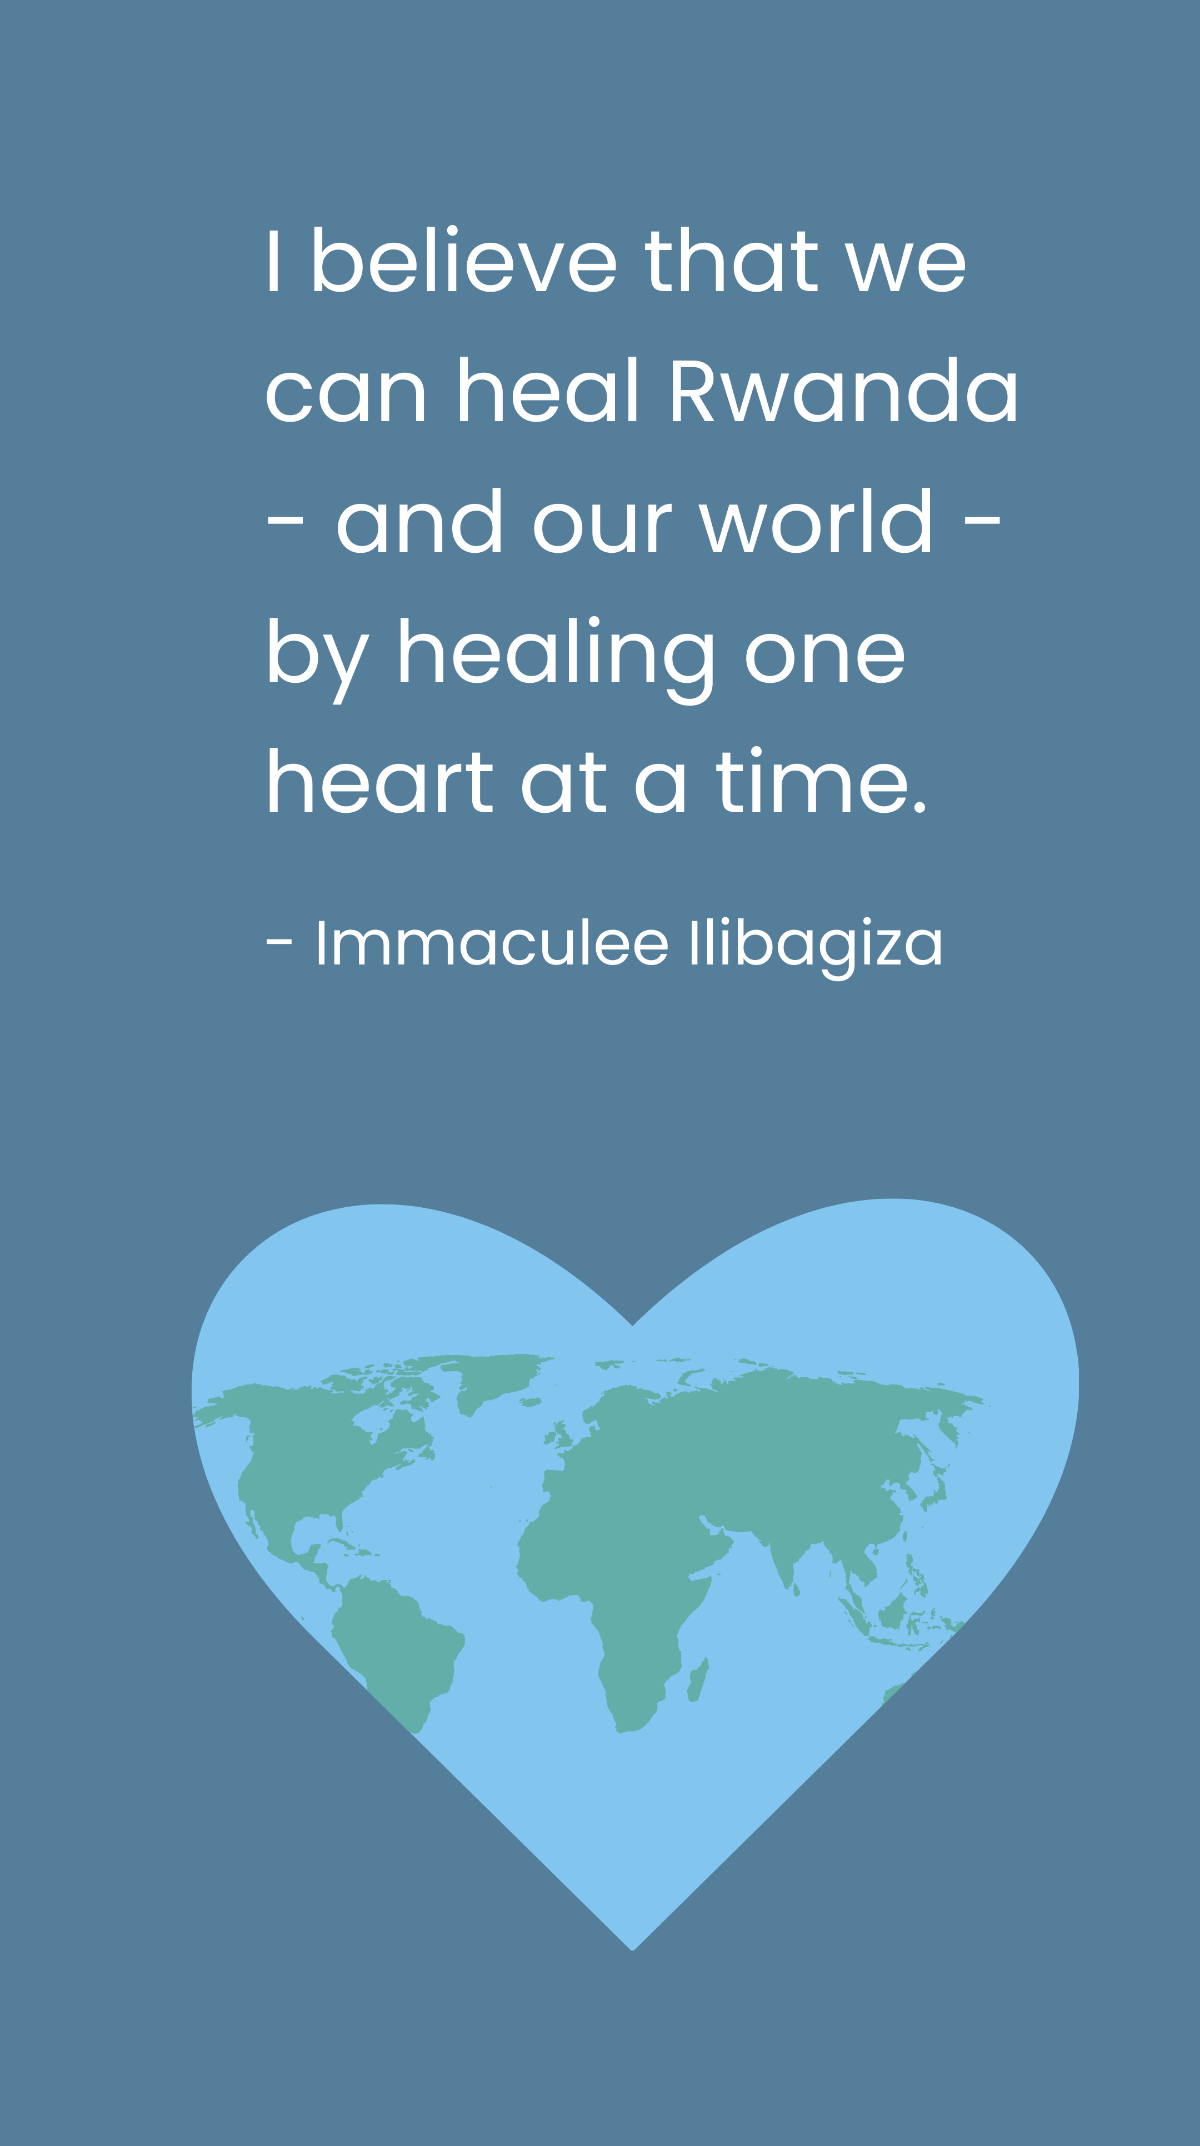 Free Immaculee Ilibagiza - I believe that we can heal Rwanda - and our world - by healing one heart at a time. Template